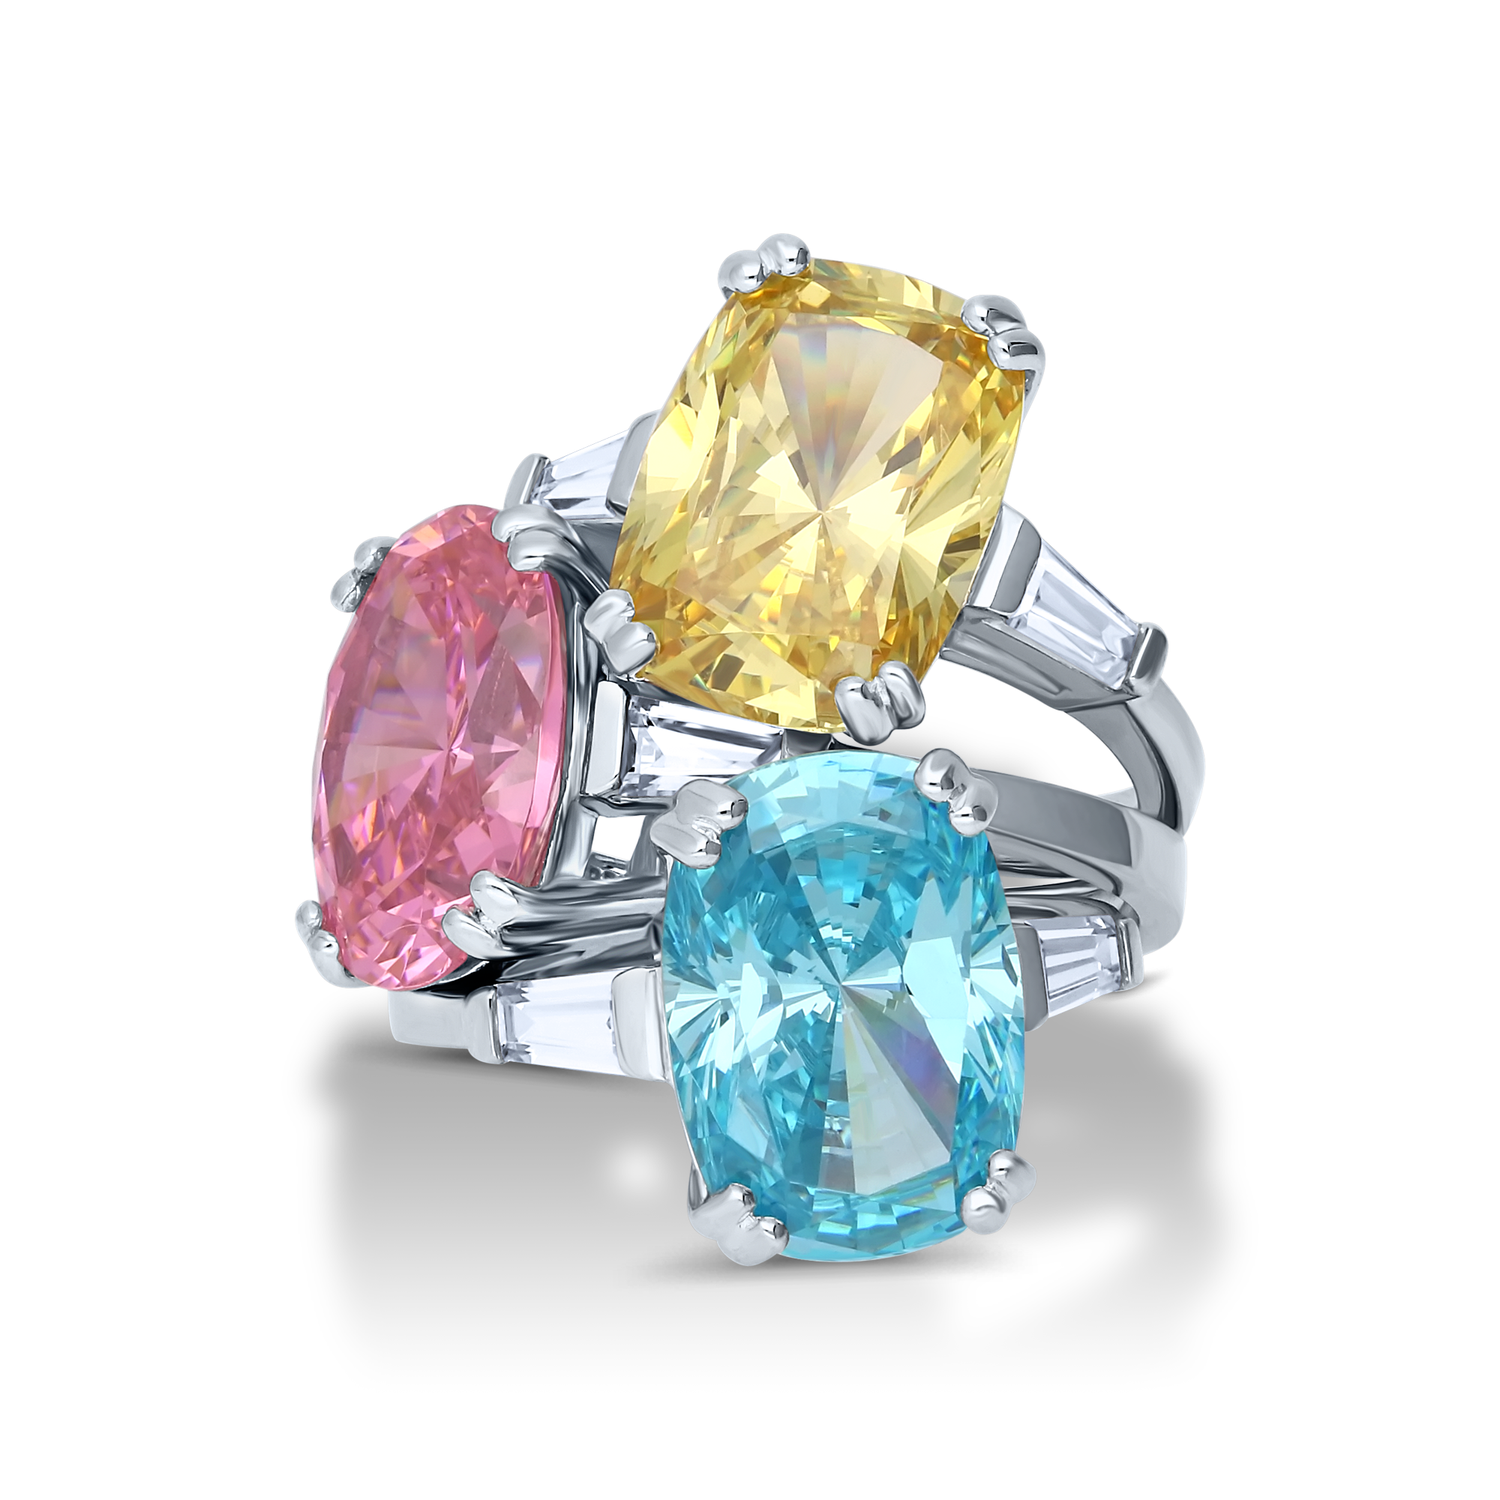 Bold statement 3 stone rings in pastel colors